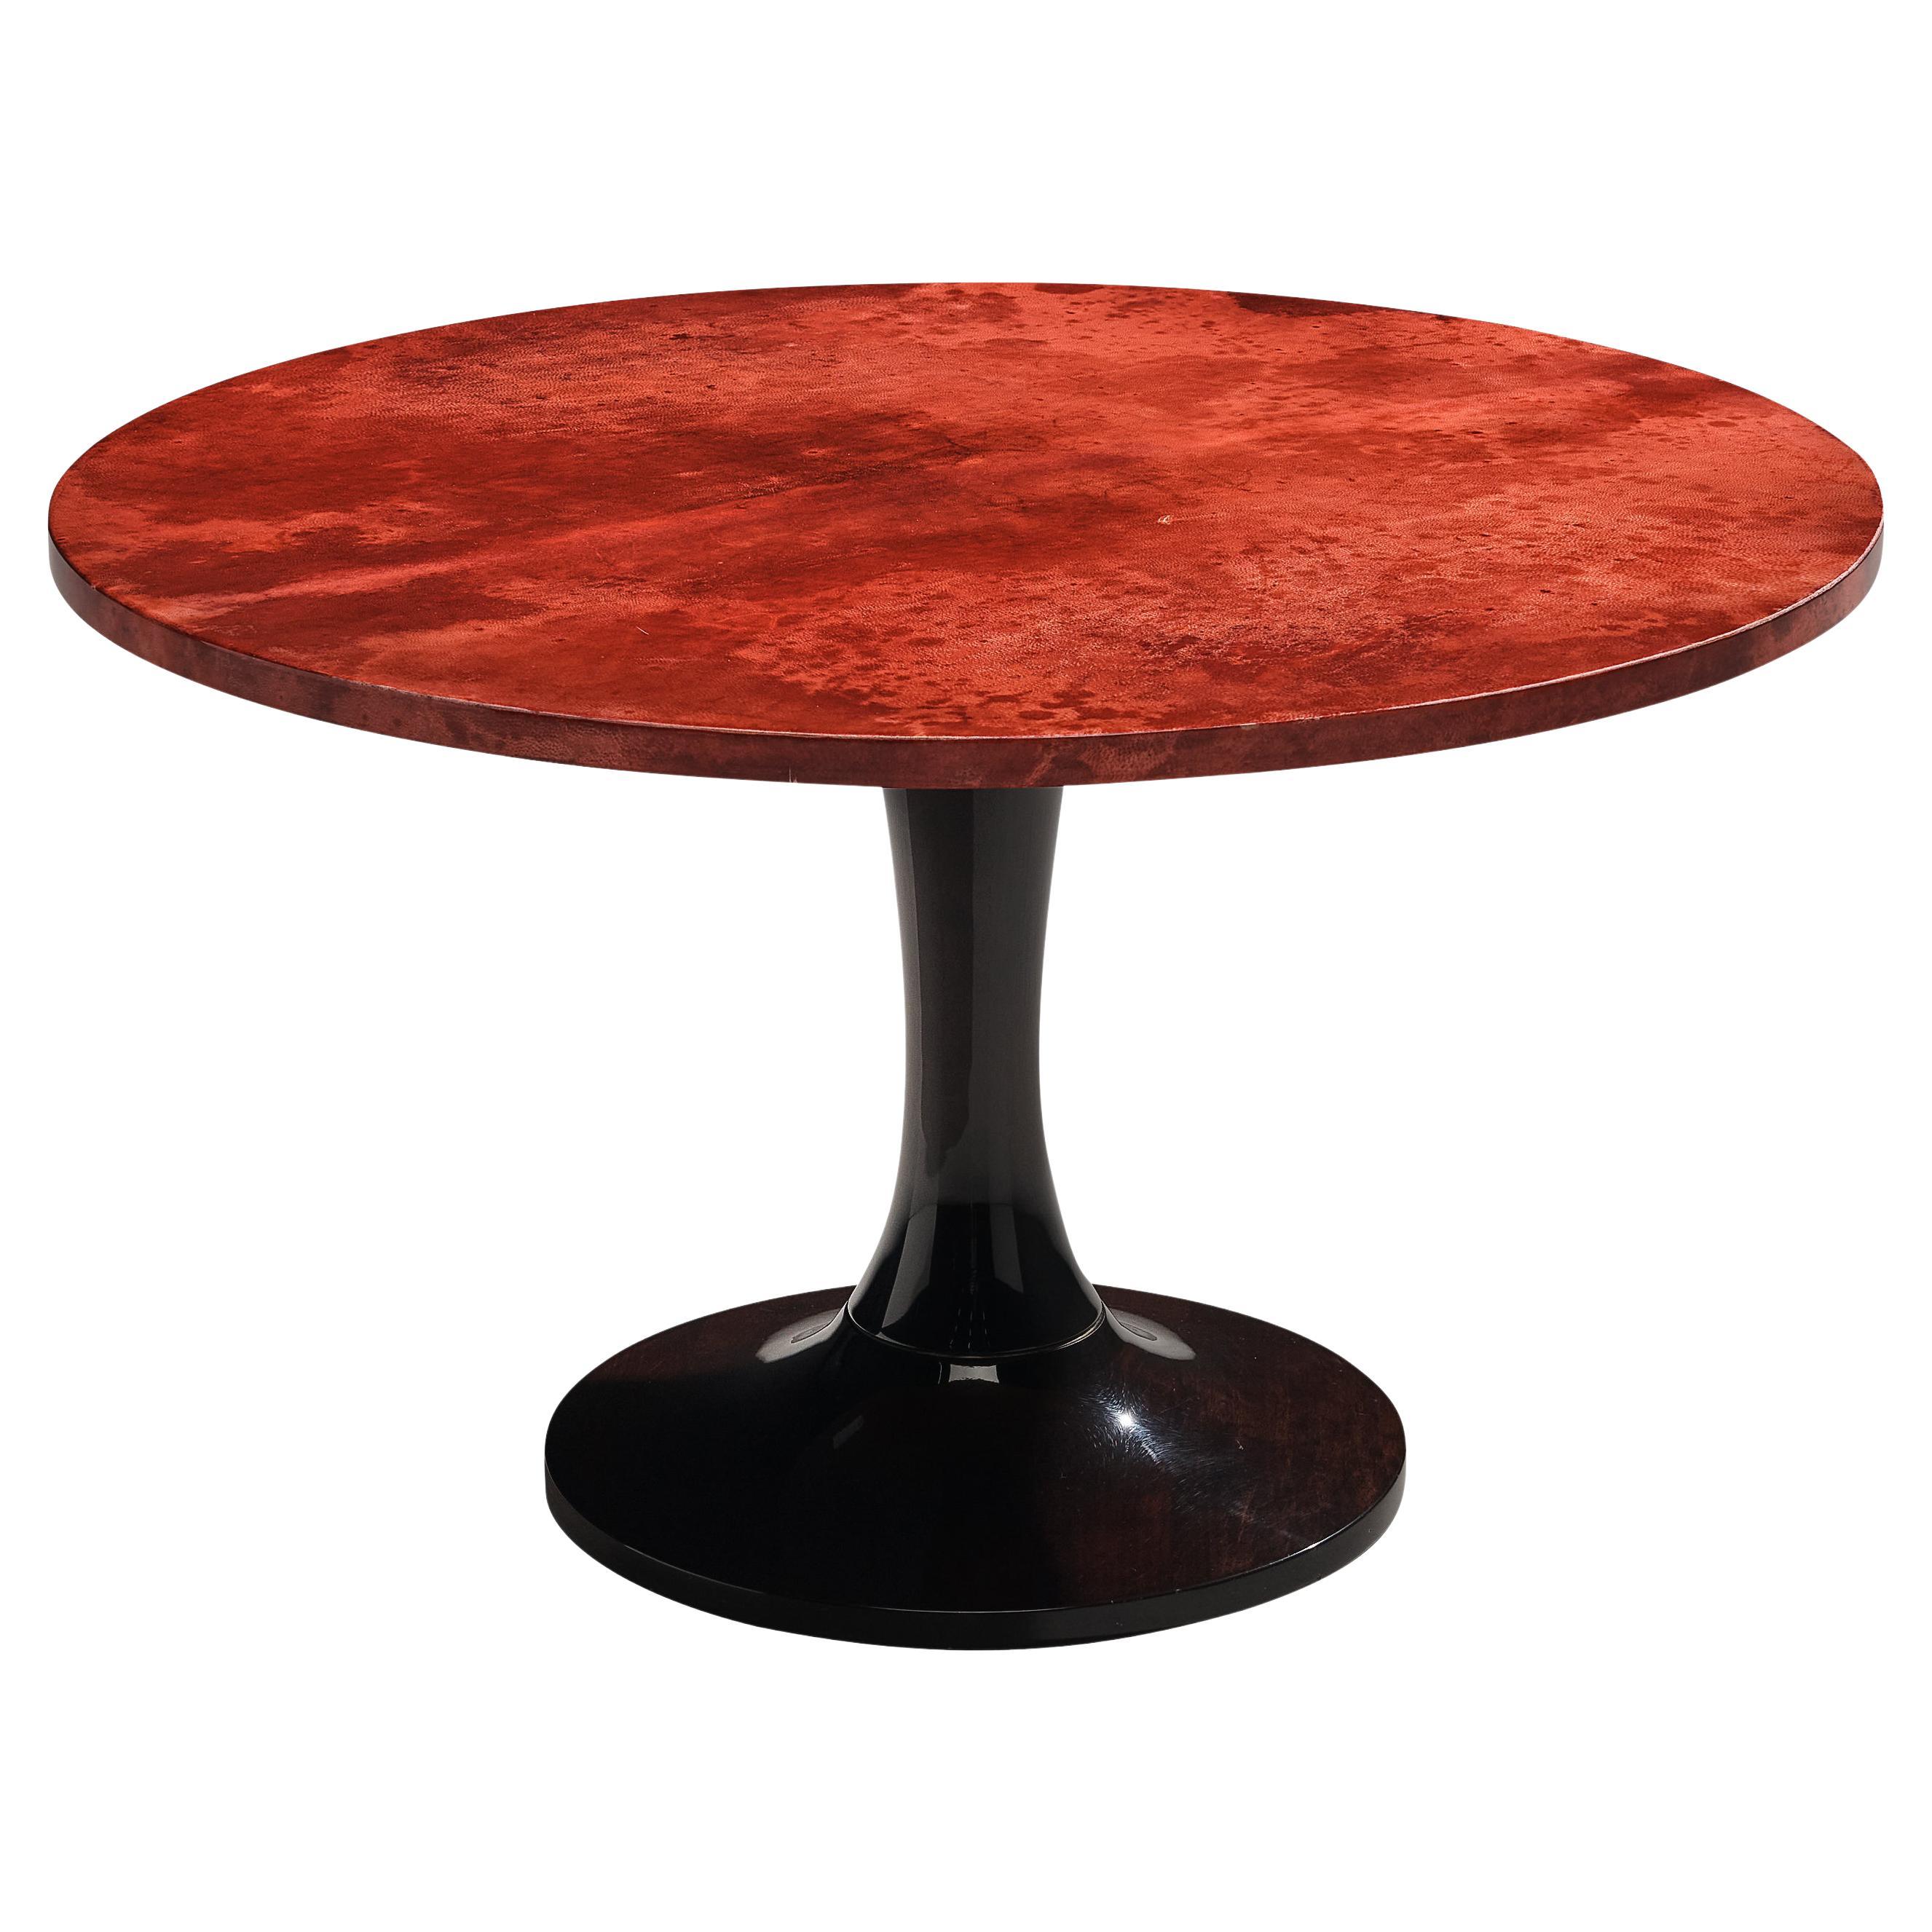 Aldo Tura Side Table in Red Goatskin Parchment